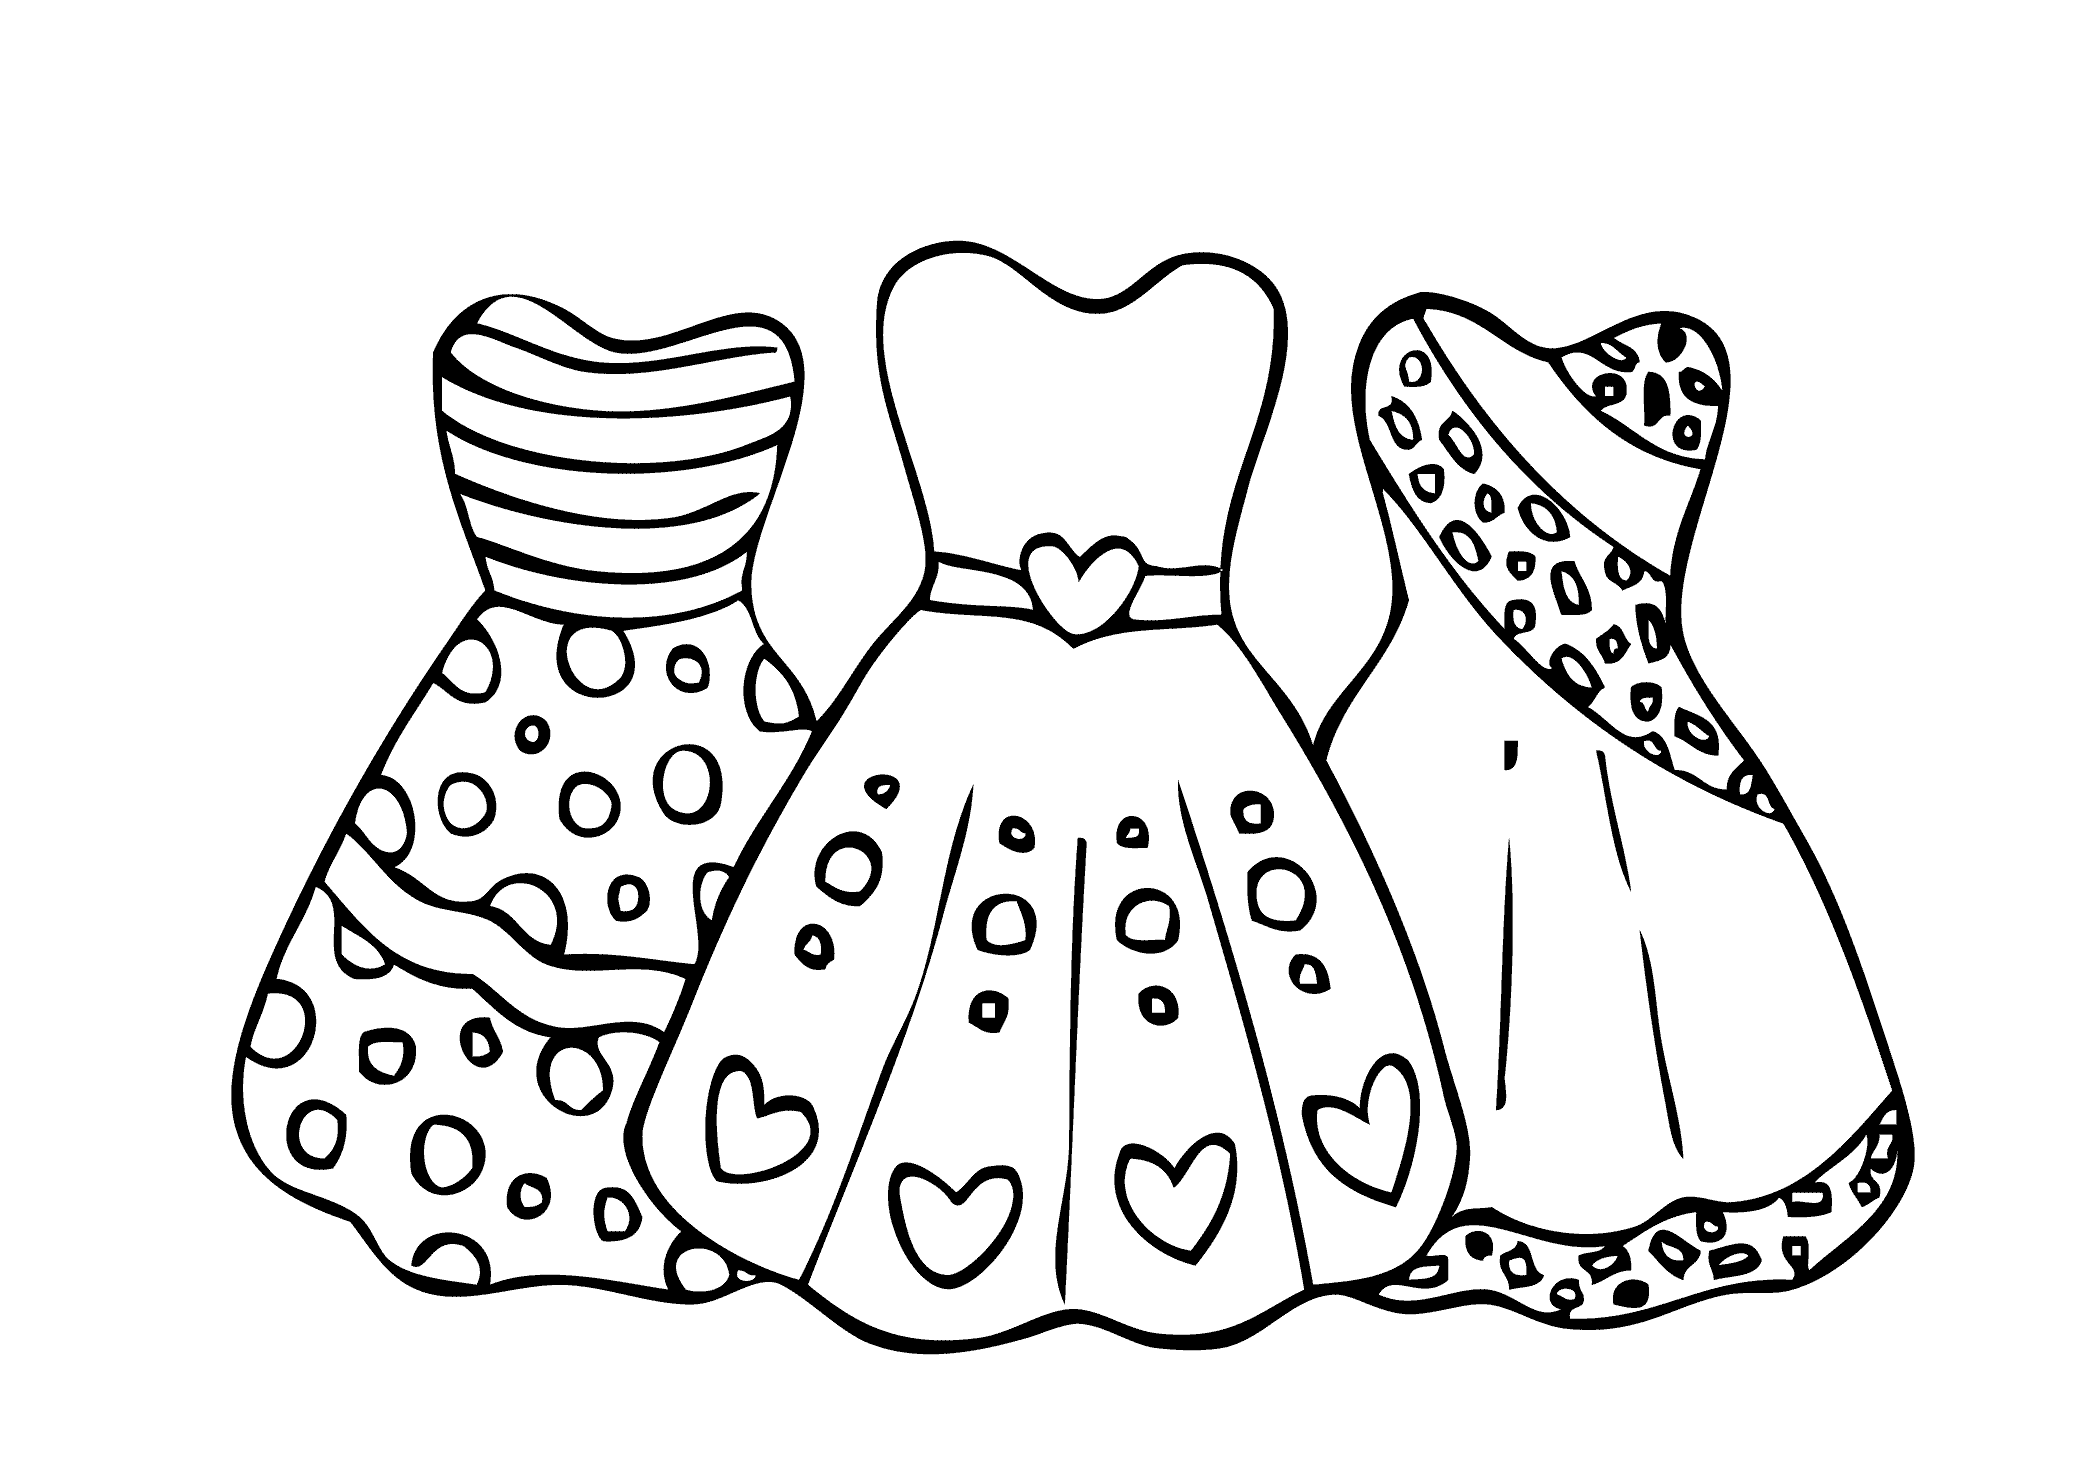 Cool dresses for girls coloring page, printable free | Coloring pages for  teenagers, Cute coloring pages, Cool coloring pages